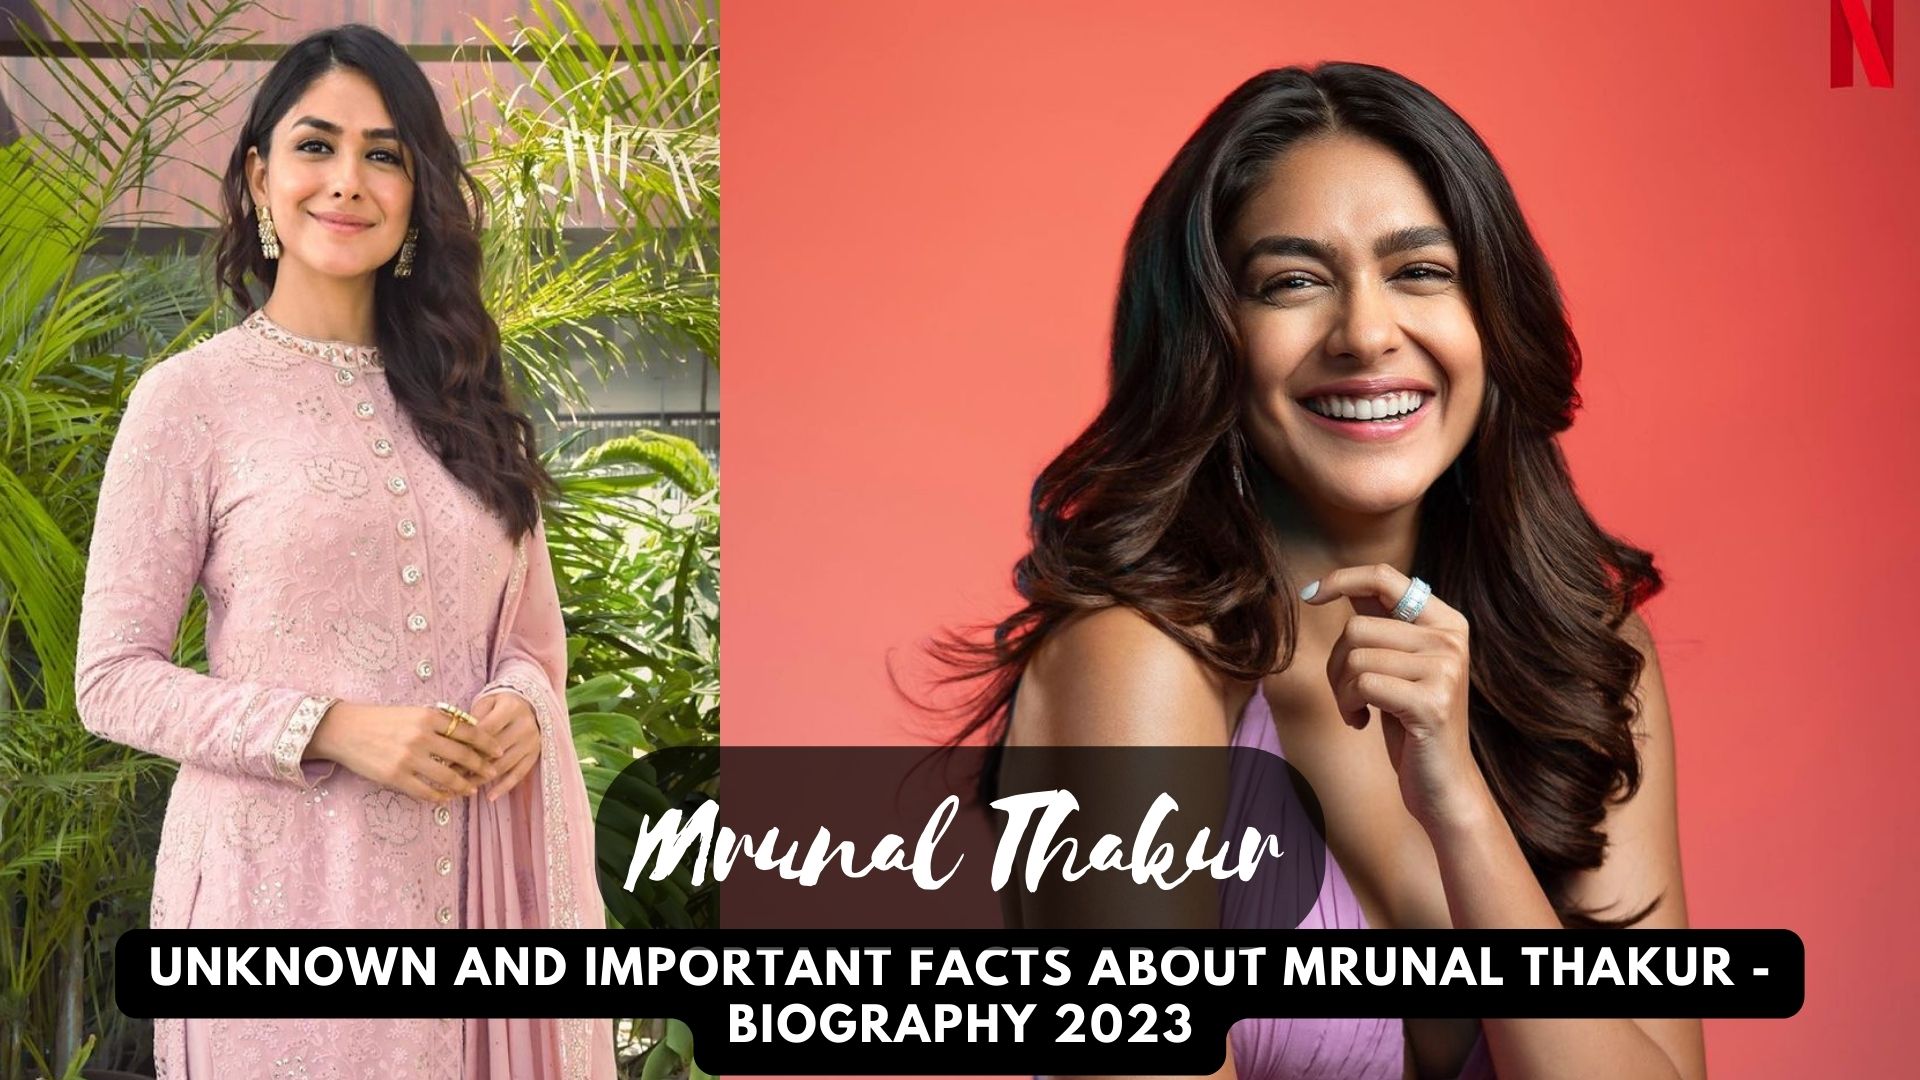 Unknown and Important Facts about Mrunal Thakur - Biography 2023